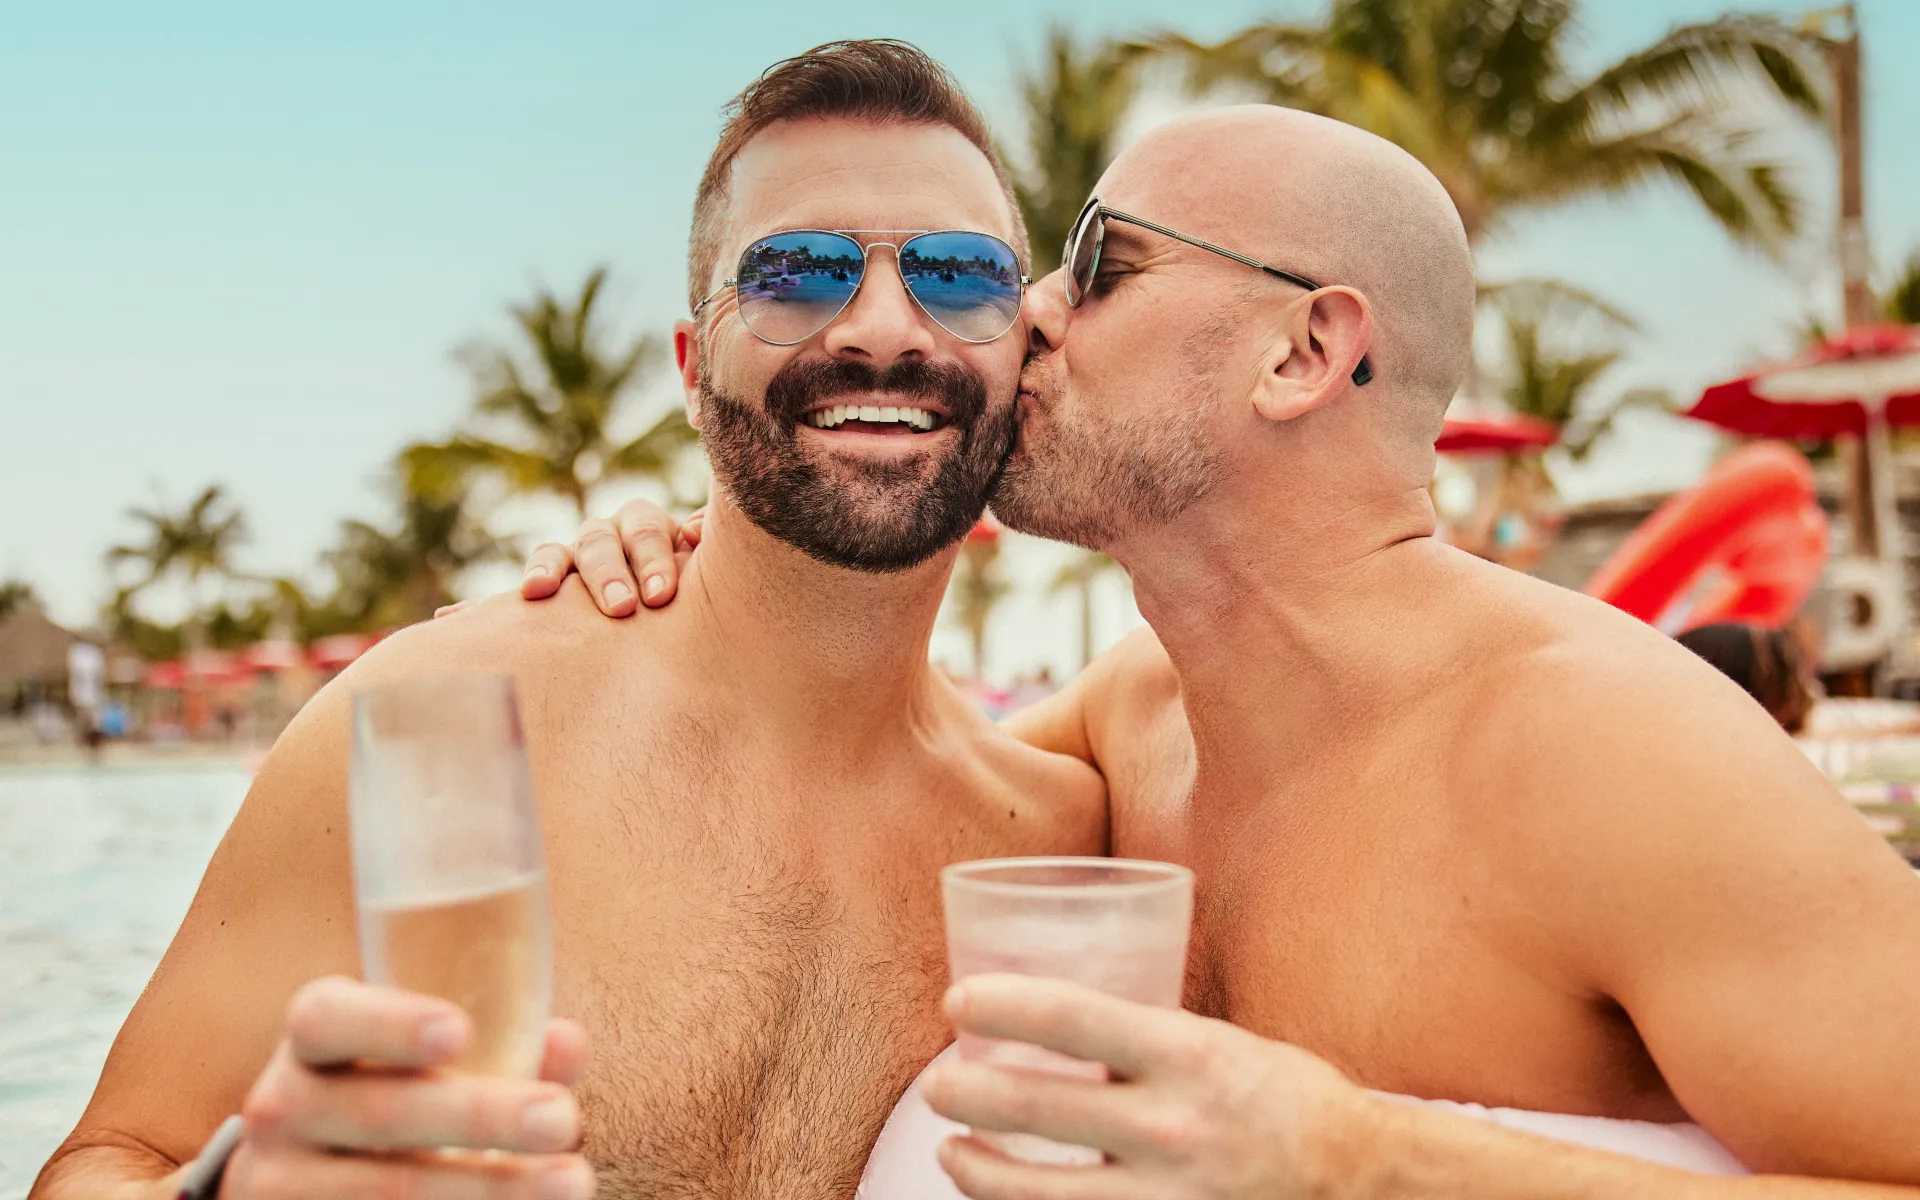 A couple enjoying drinks in a pool on holiday